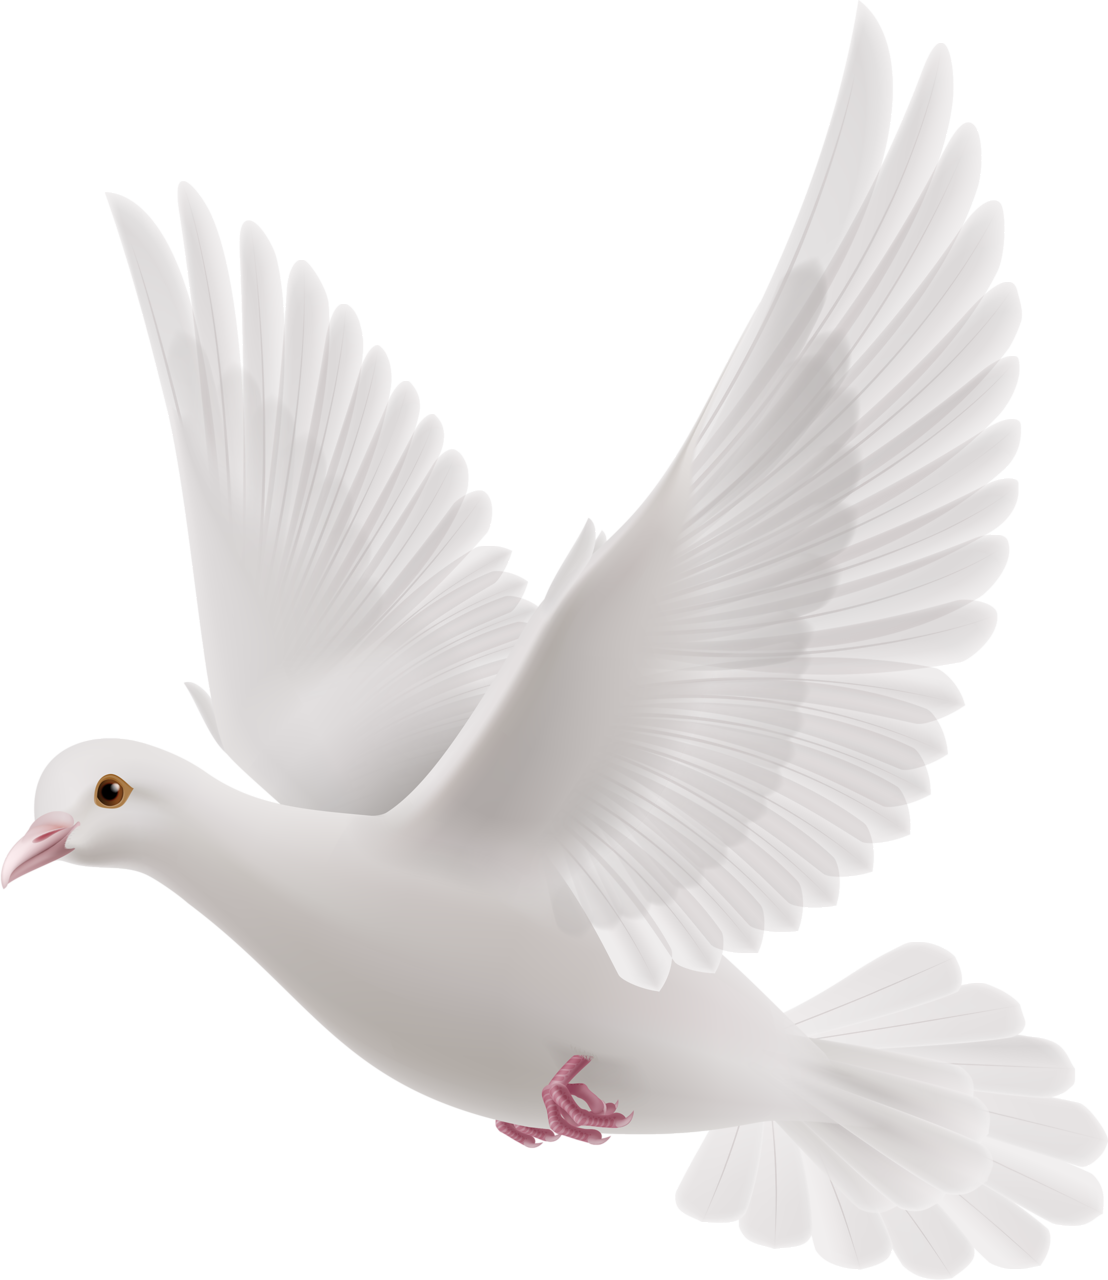 White Peace Pigeon HQ Image Free PNG Image